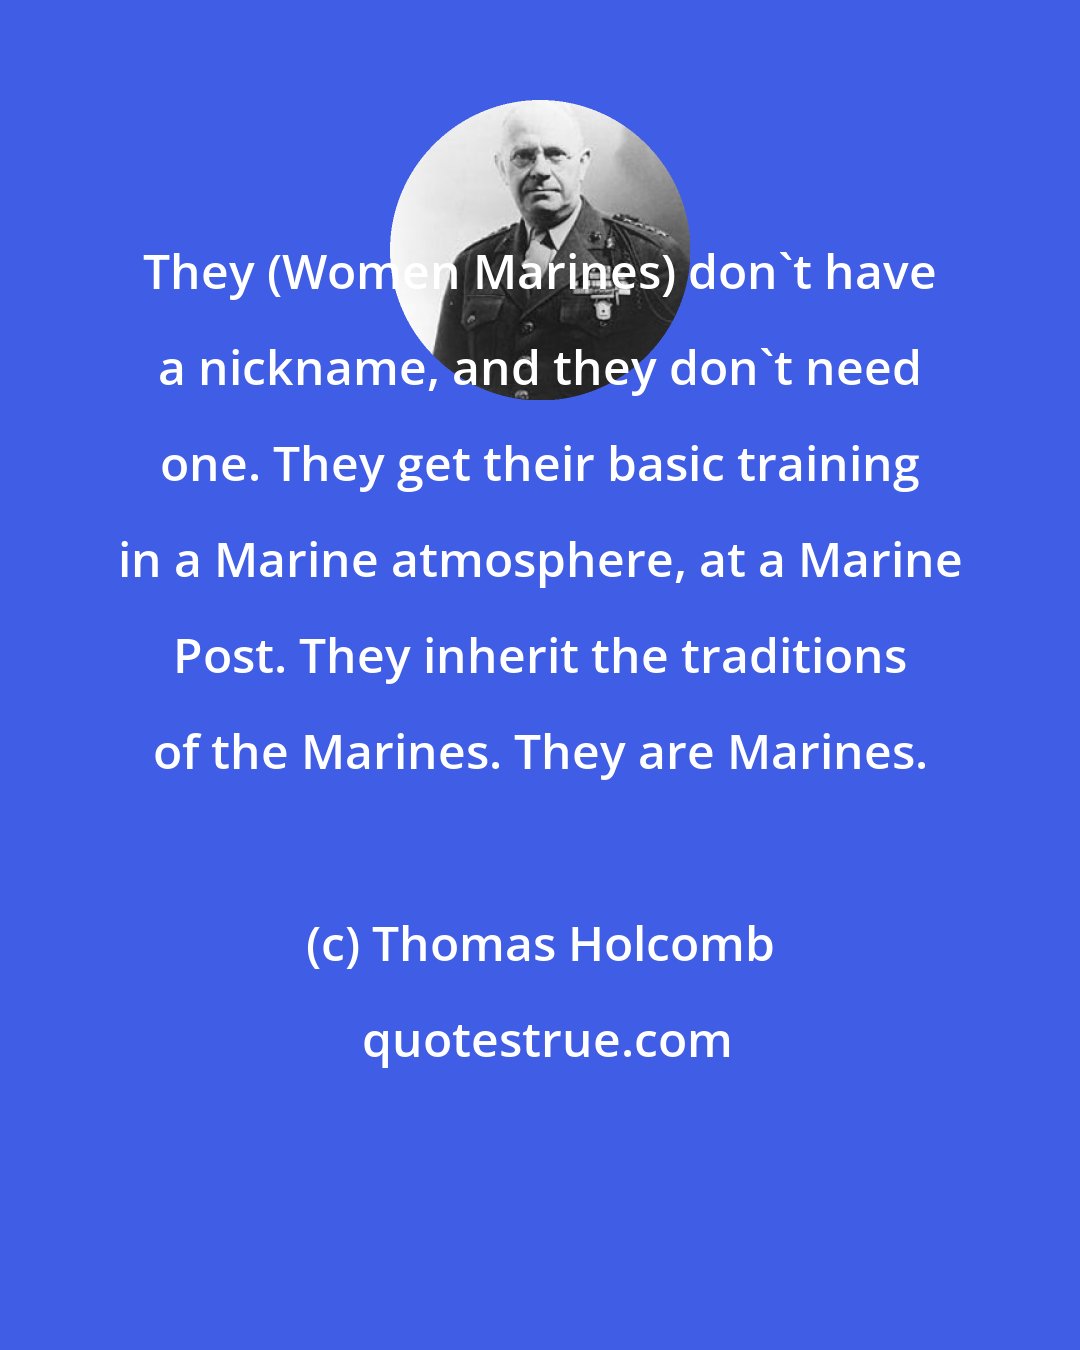 Thomas Holcomb: They (Women Marines) don't have a nickname, and they don't need one. They get their basic training in a Marine atmosphere, at a Marine Post. They inherit the traditions of the Marines. They are Marines.